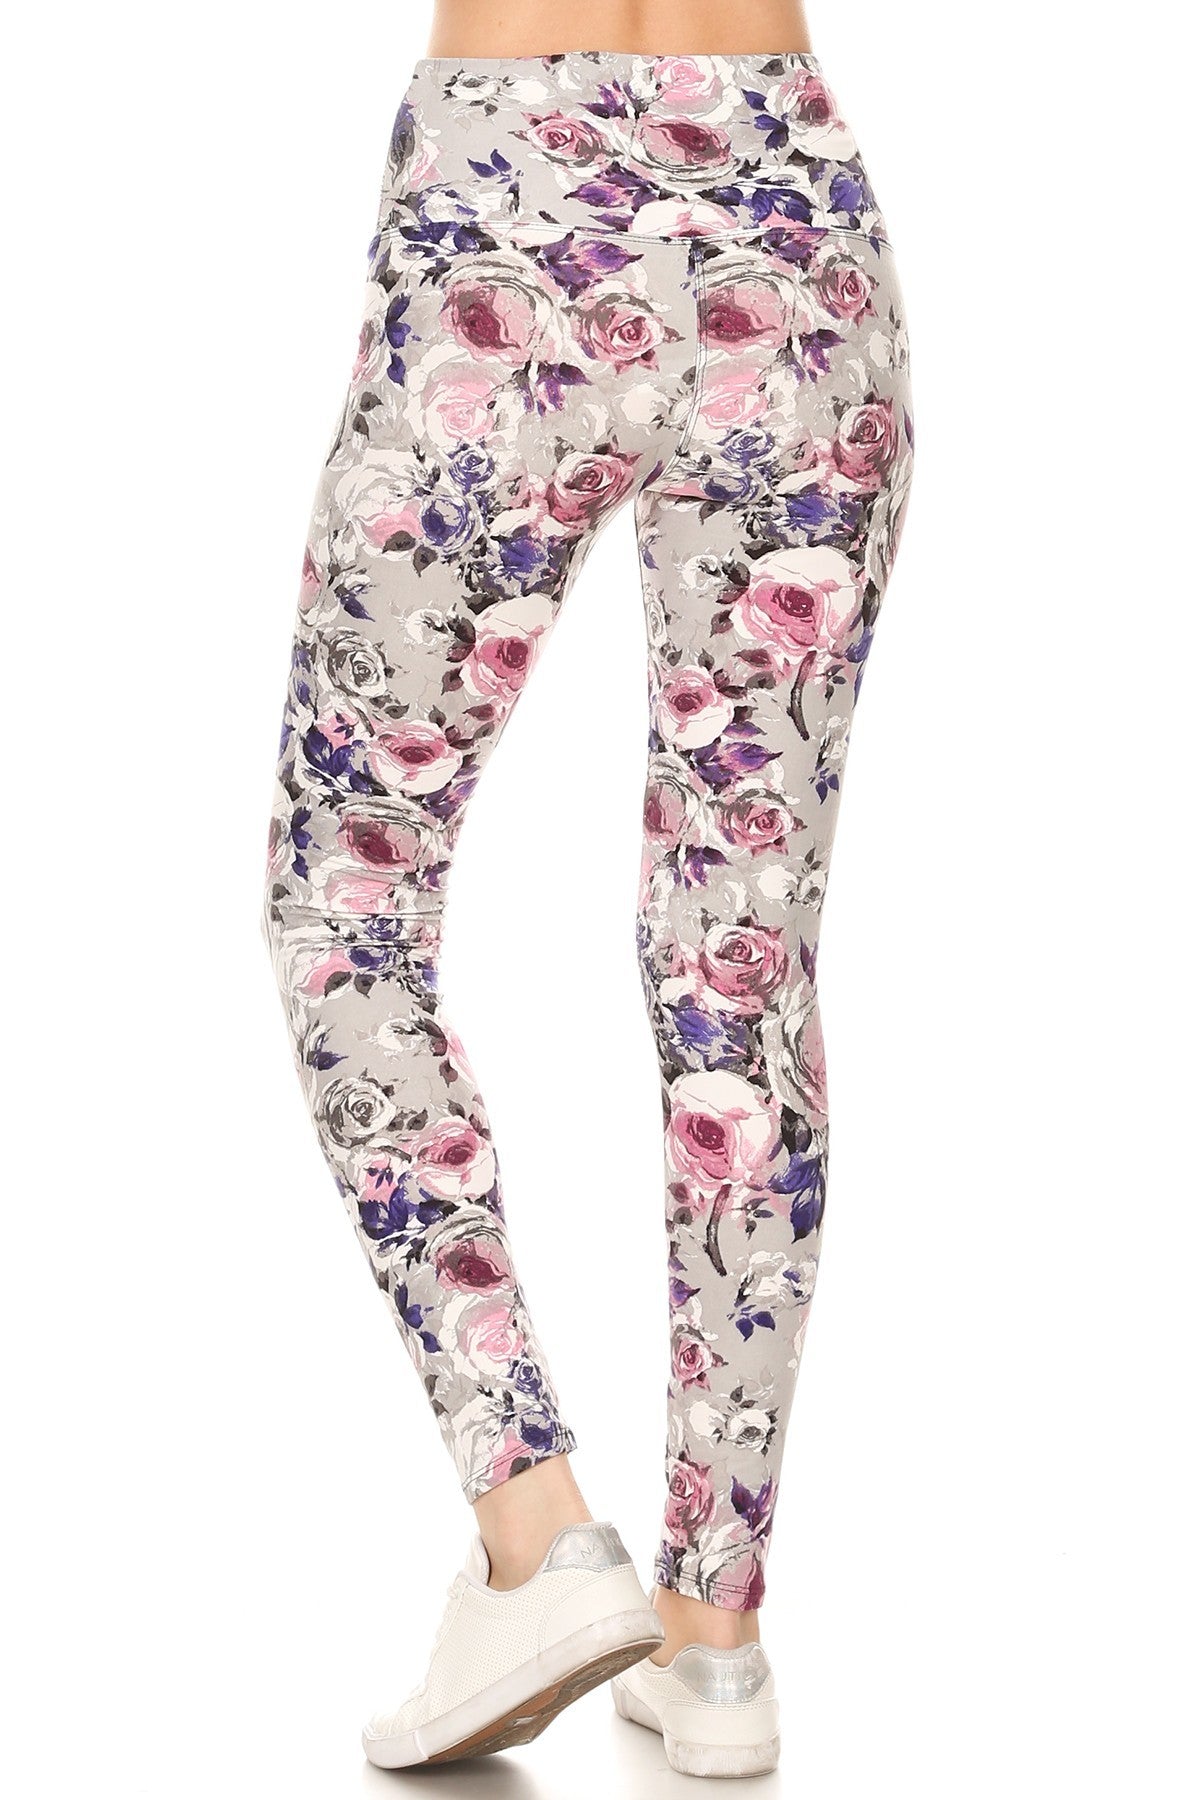 5-inch Long Yoga Style Banded Lined Floral Printed Knit Legging With High Waist - Love It Clothing